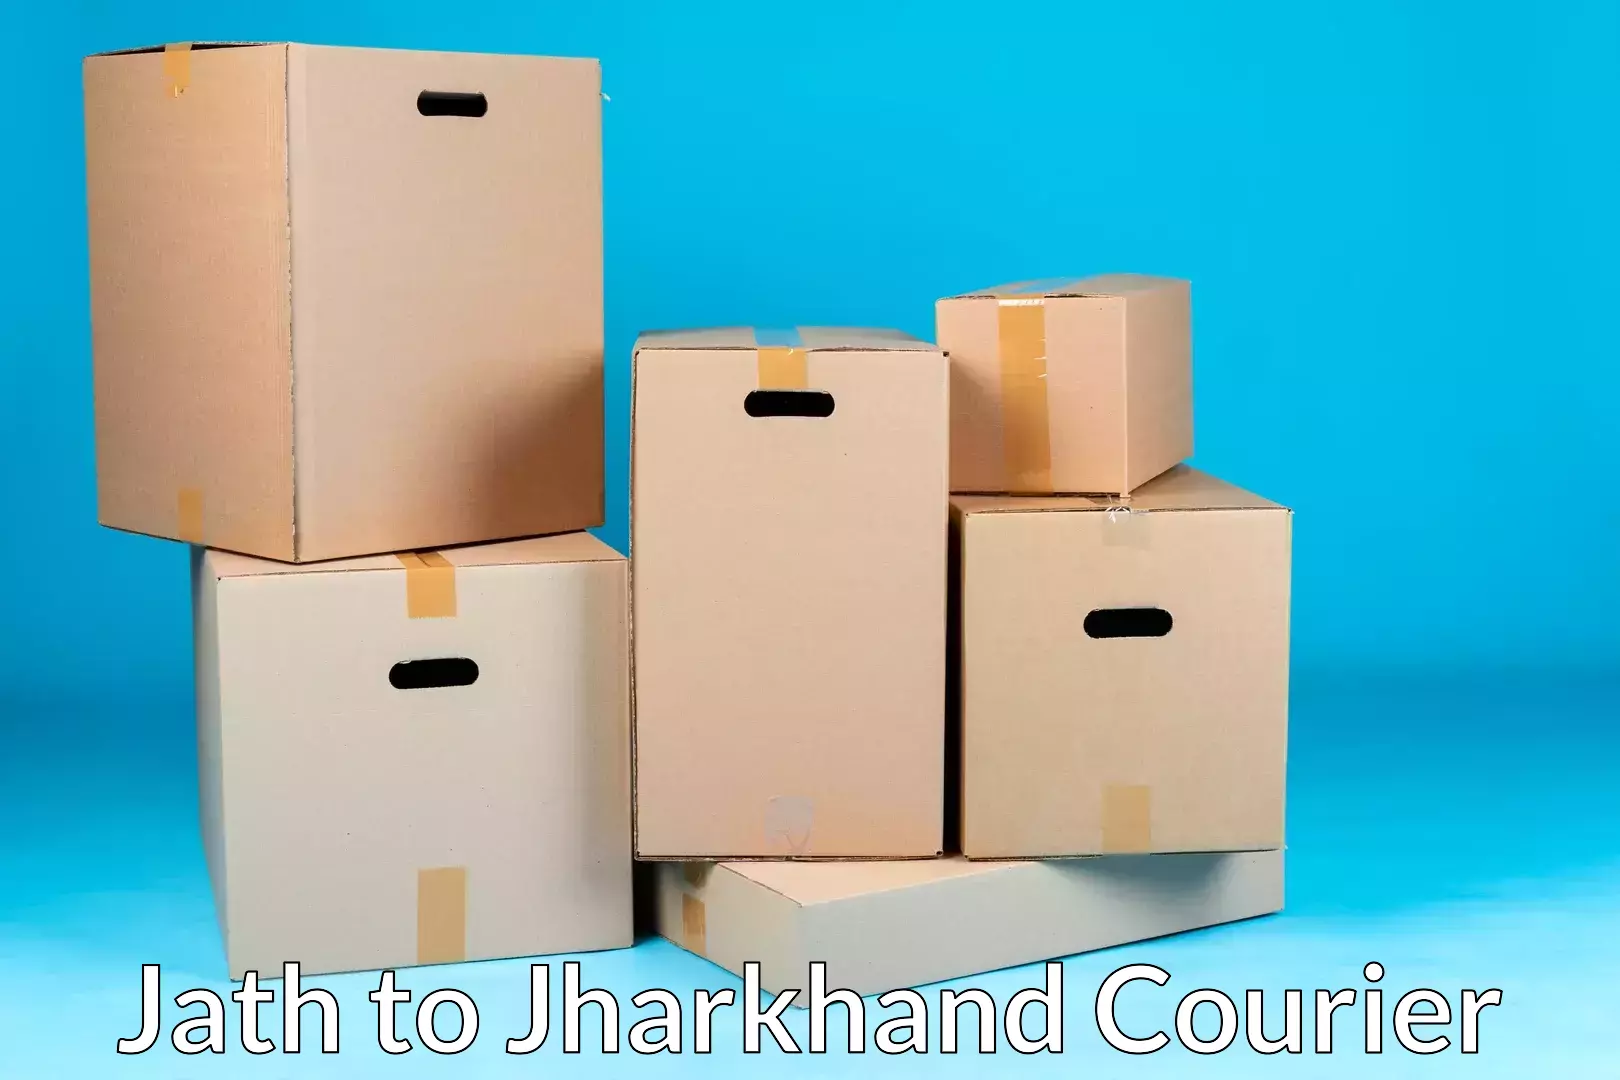 Quality relocation services Jath to Jharkhand